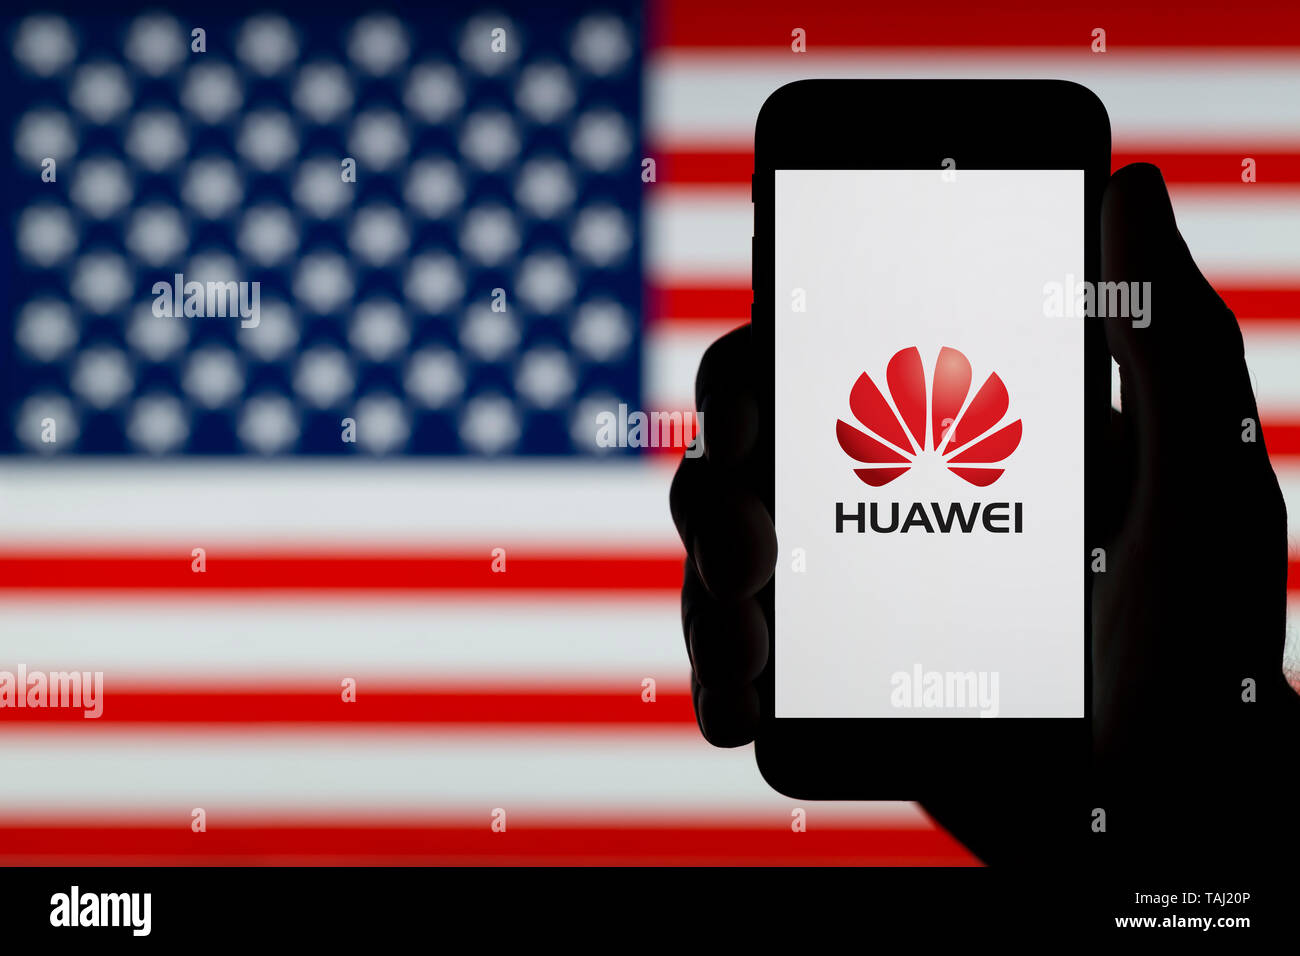 A silhouetted hand of a man holds a smartphone displaying the logo of Chinese company Huawei, with a USA flag in the background (Editorial use only). Stock Photo